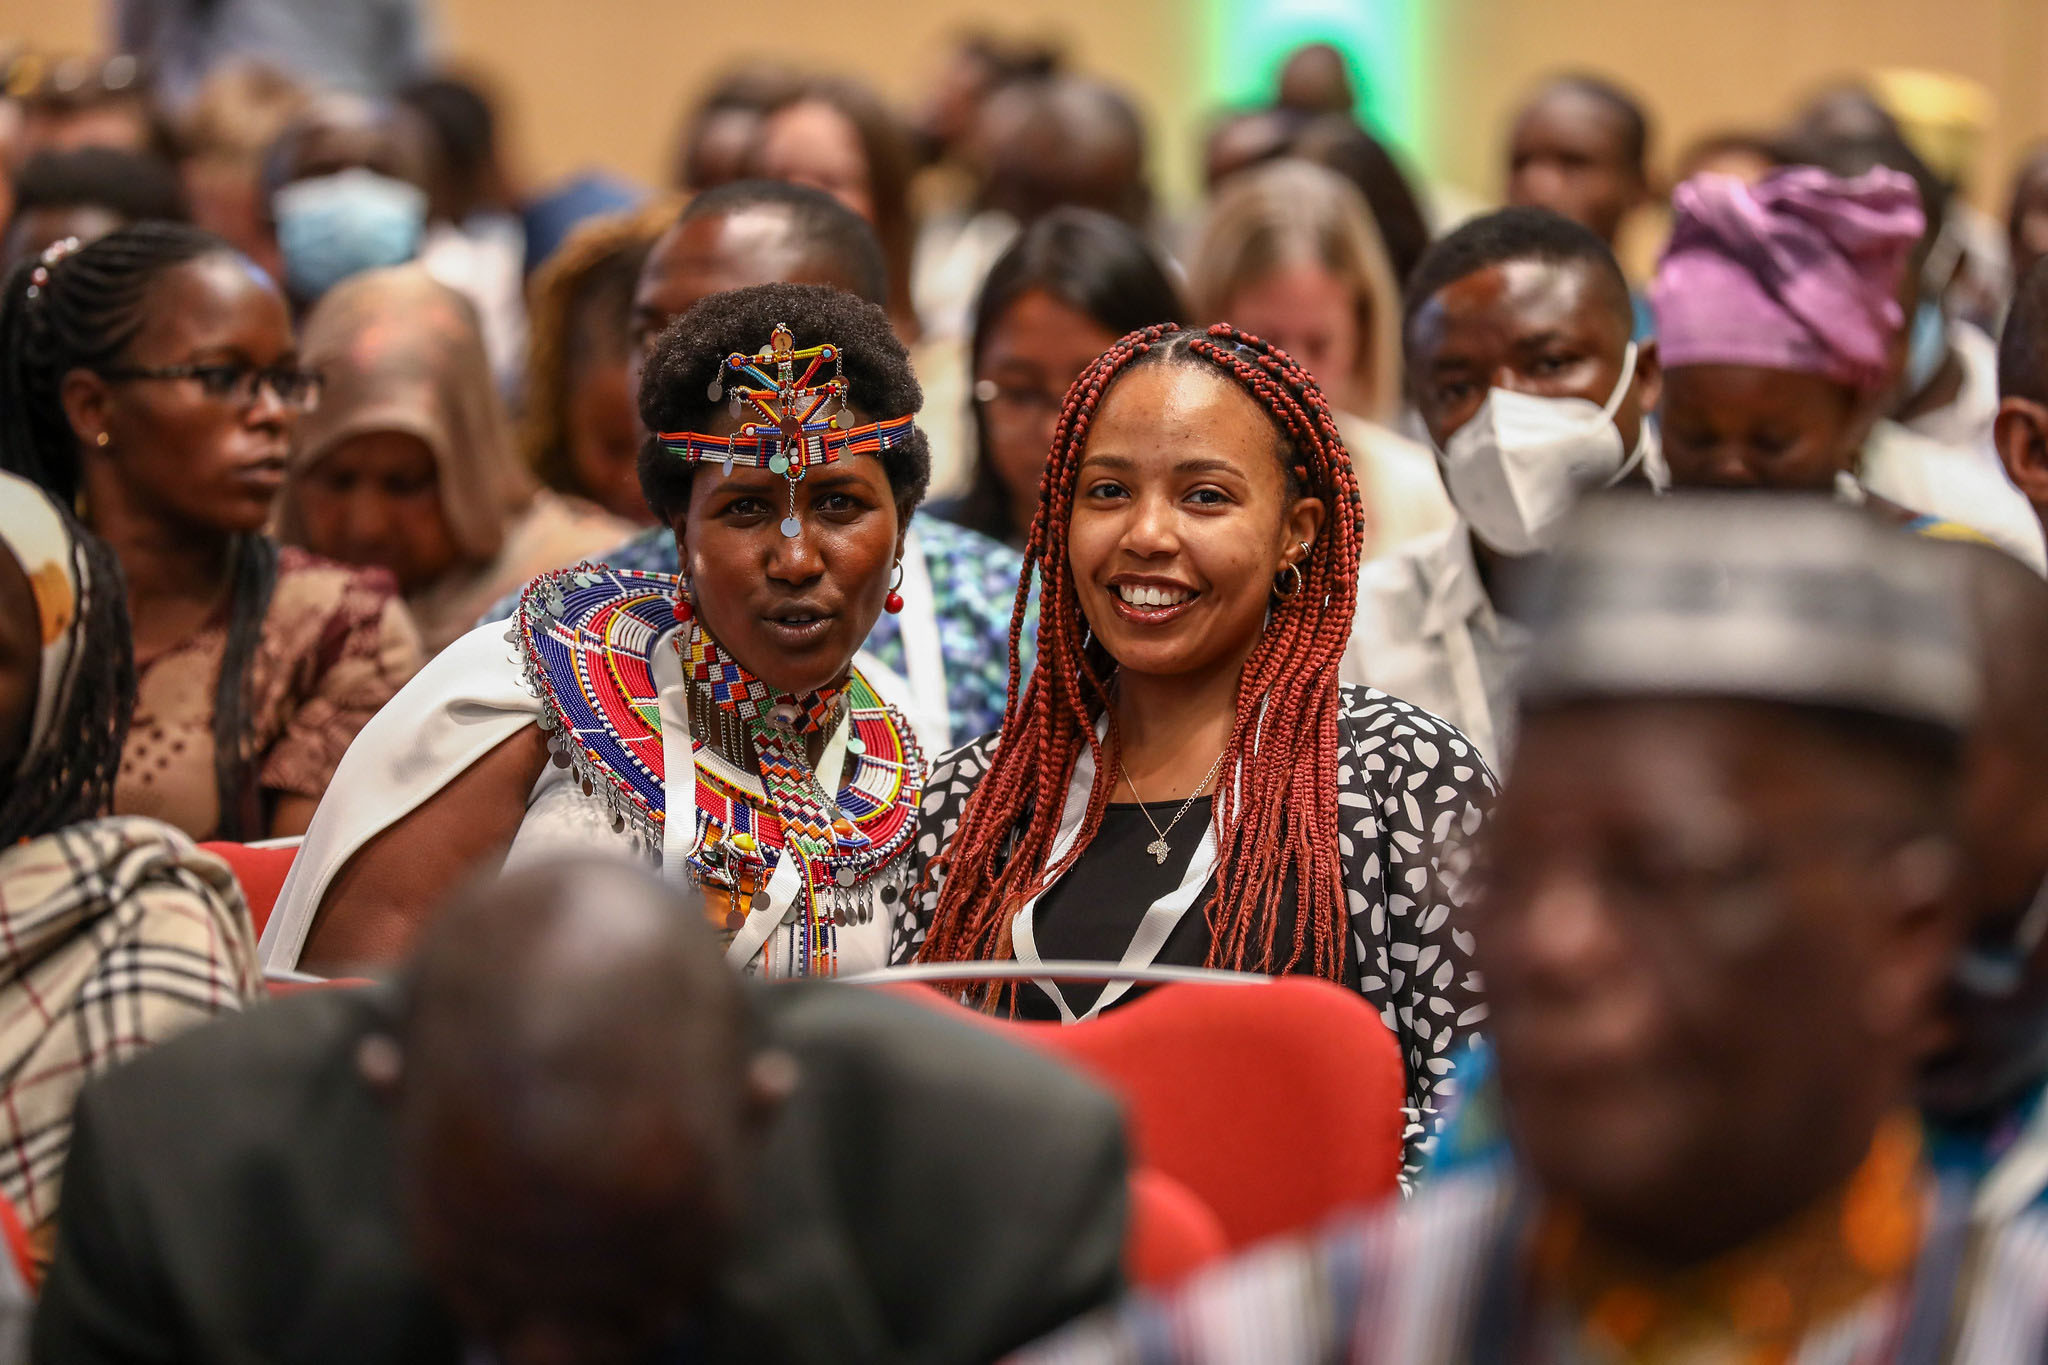 A cross-section of delegates during the official opening of the African Protected Areas Congress in Kigali on Monday, July 18. The first-ever continent-wide gathering of over 2,000 delegates,  will run through July 23. Photo: Dan Nsengiyumva.